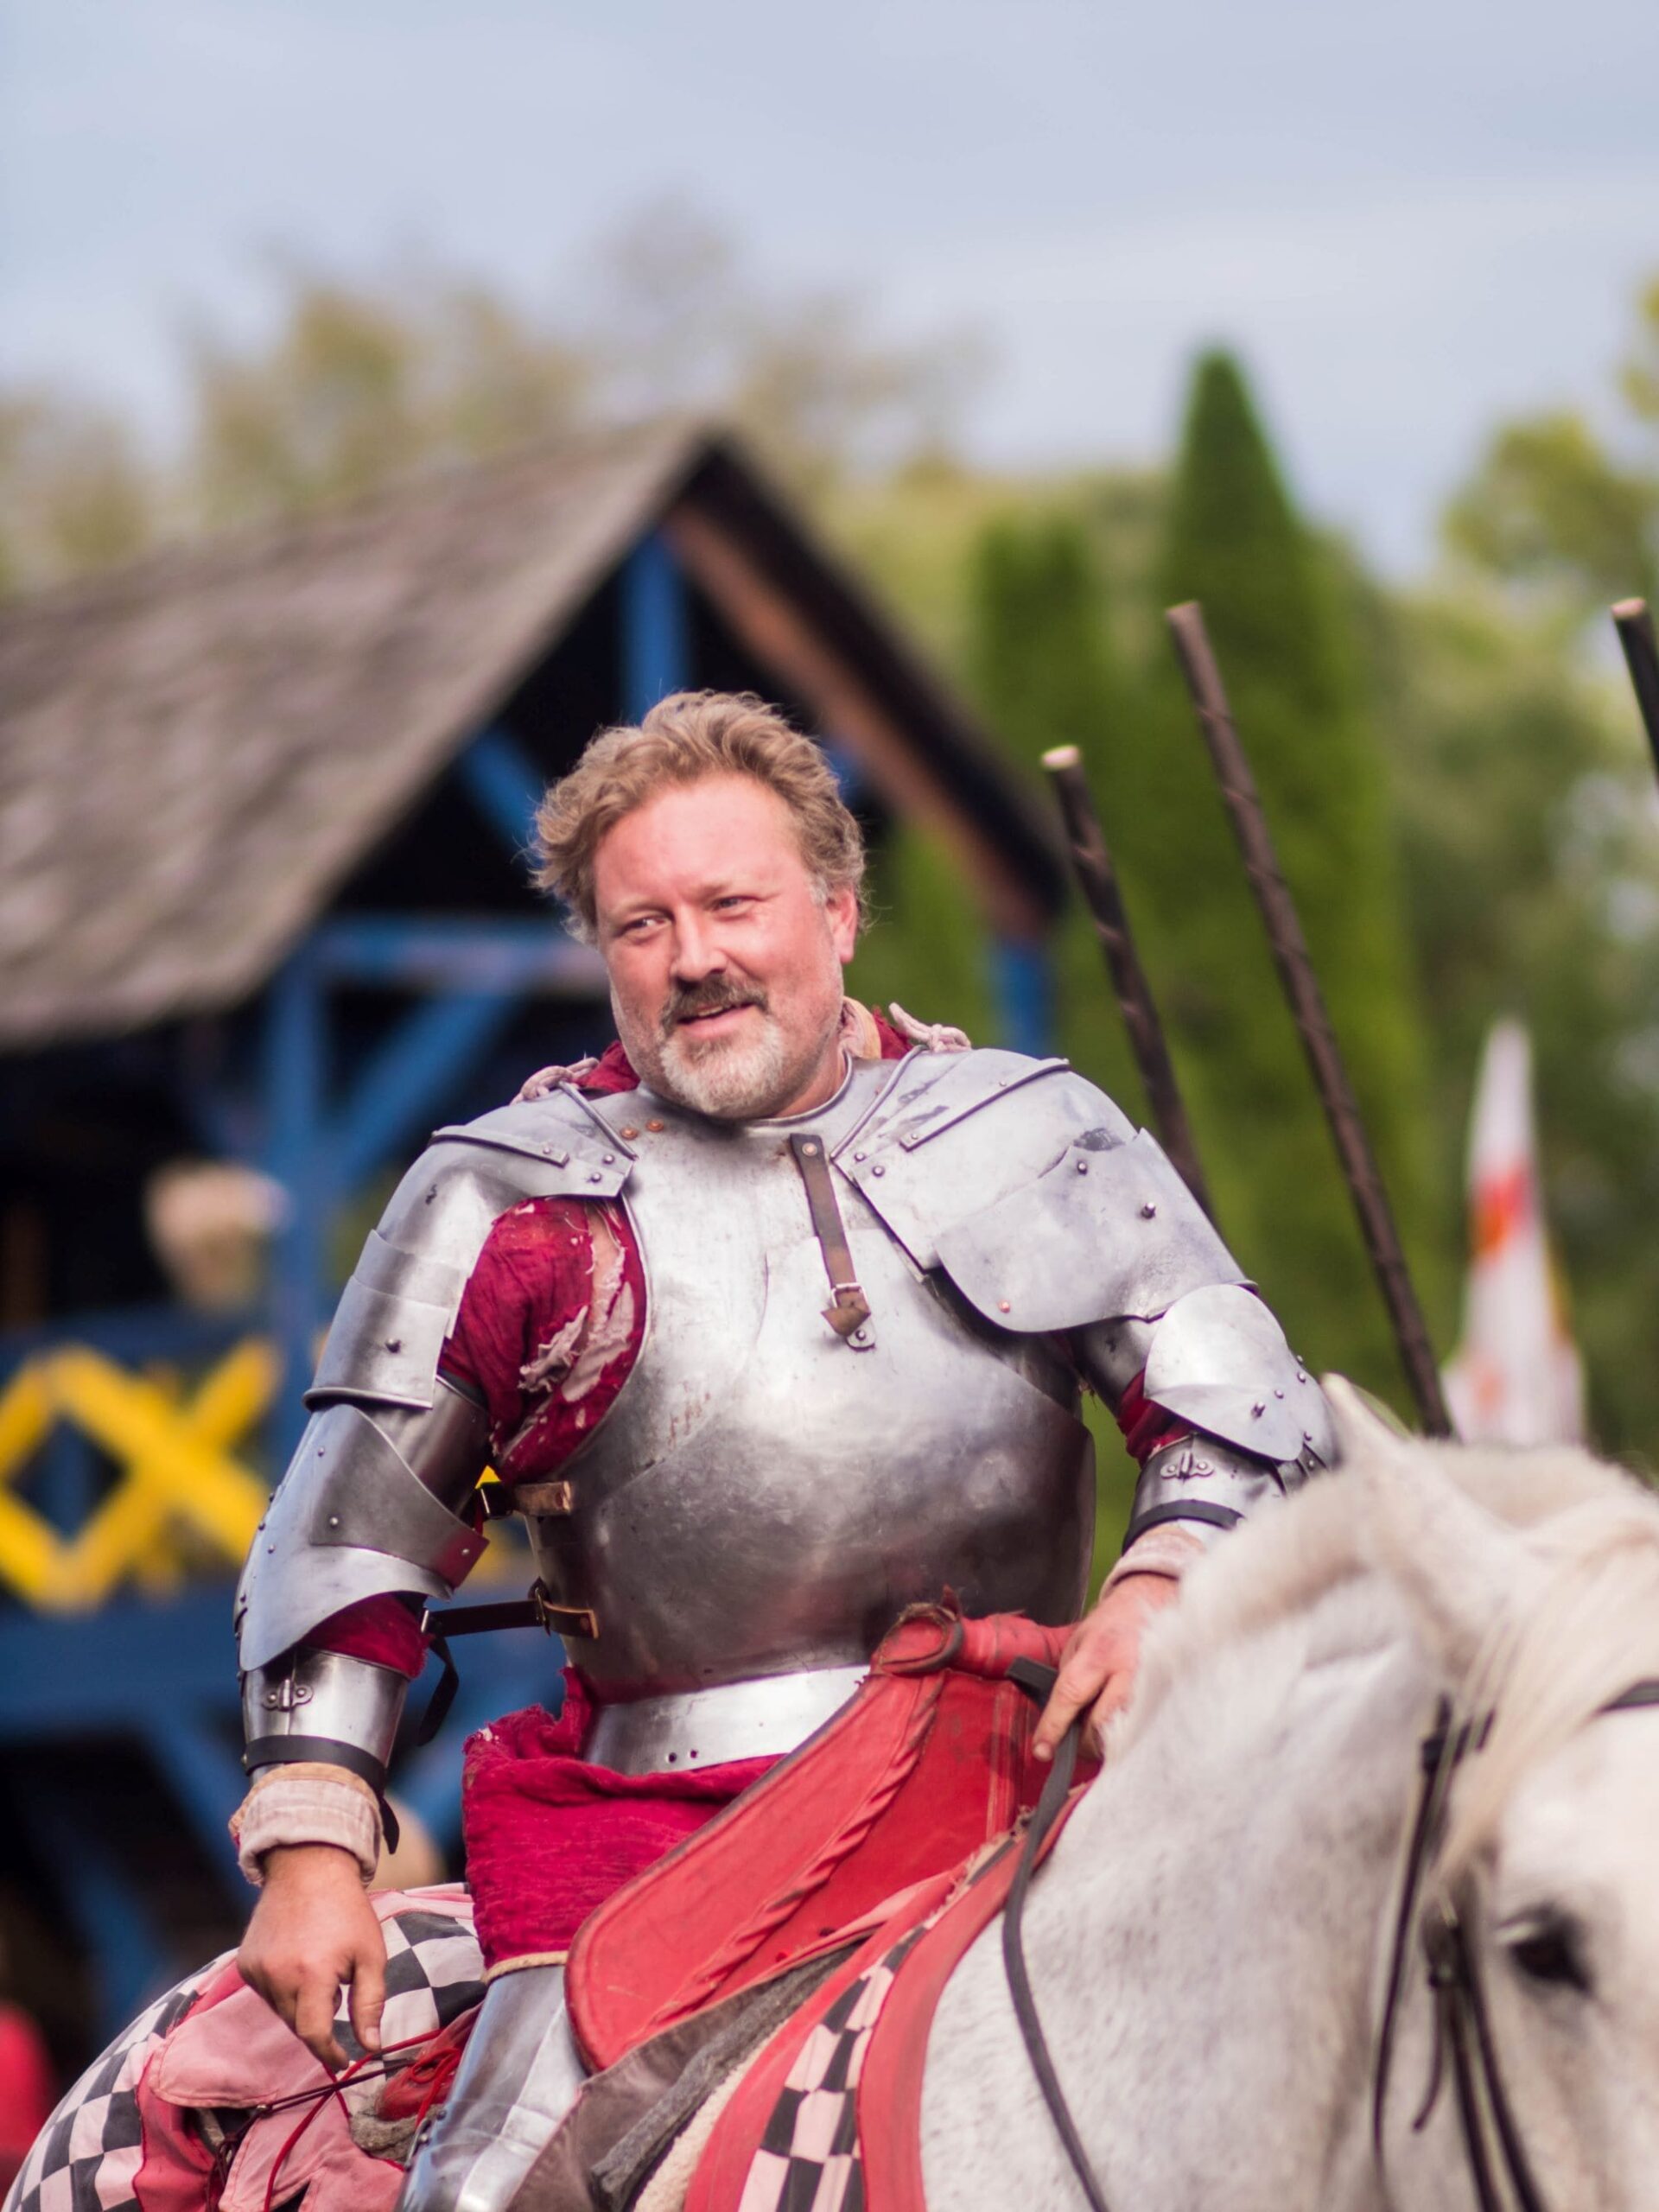 An image of a man dressed as a knight on a horse at the Original Renaissance Faire.